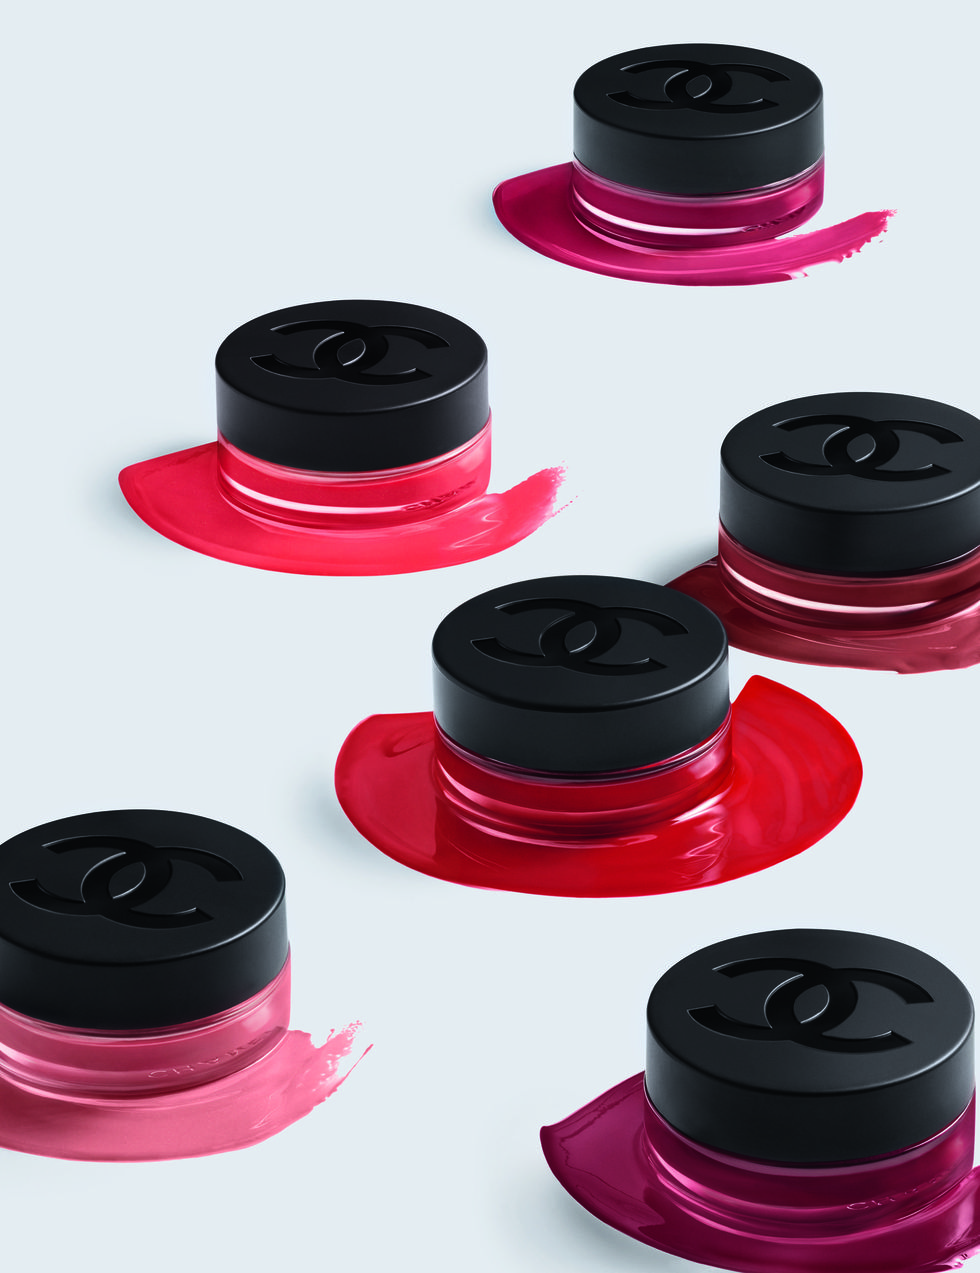 CHANEL N°1 DE CHANEL- Red Camellia Revitalizing Lip and Cheek Balm - Reviews